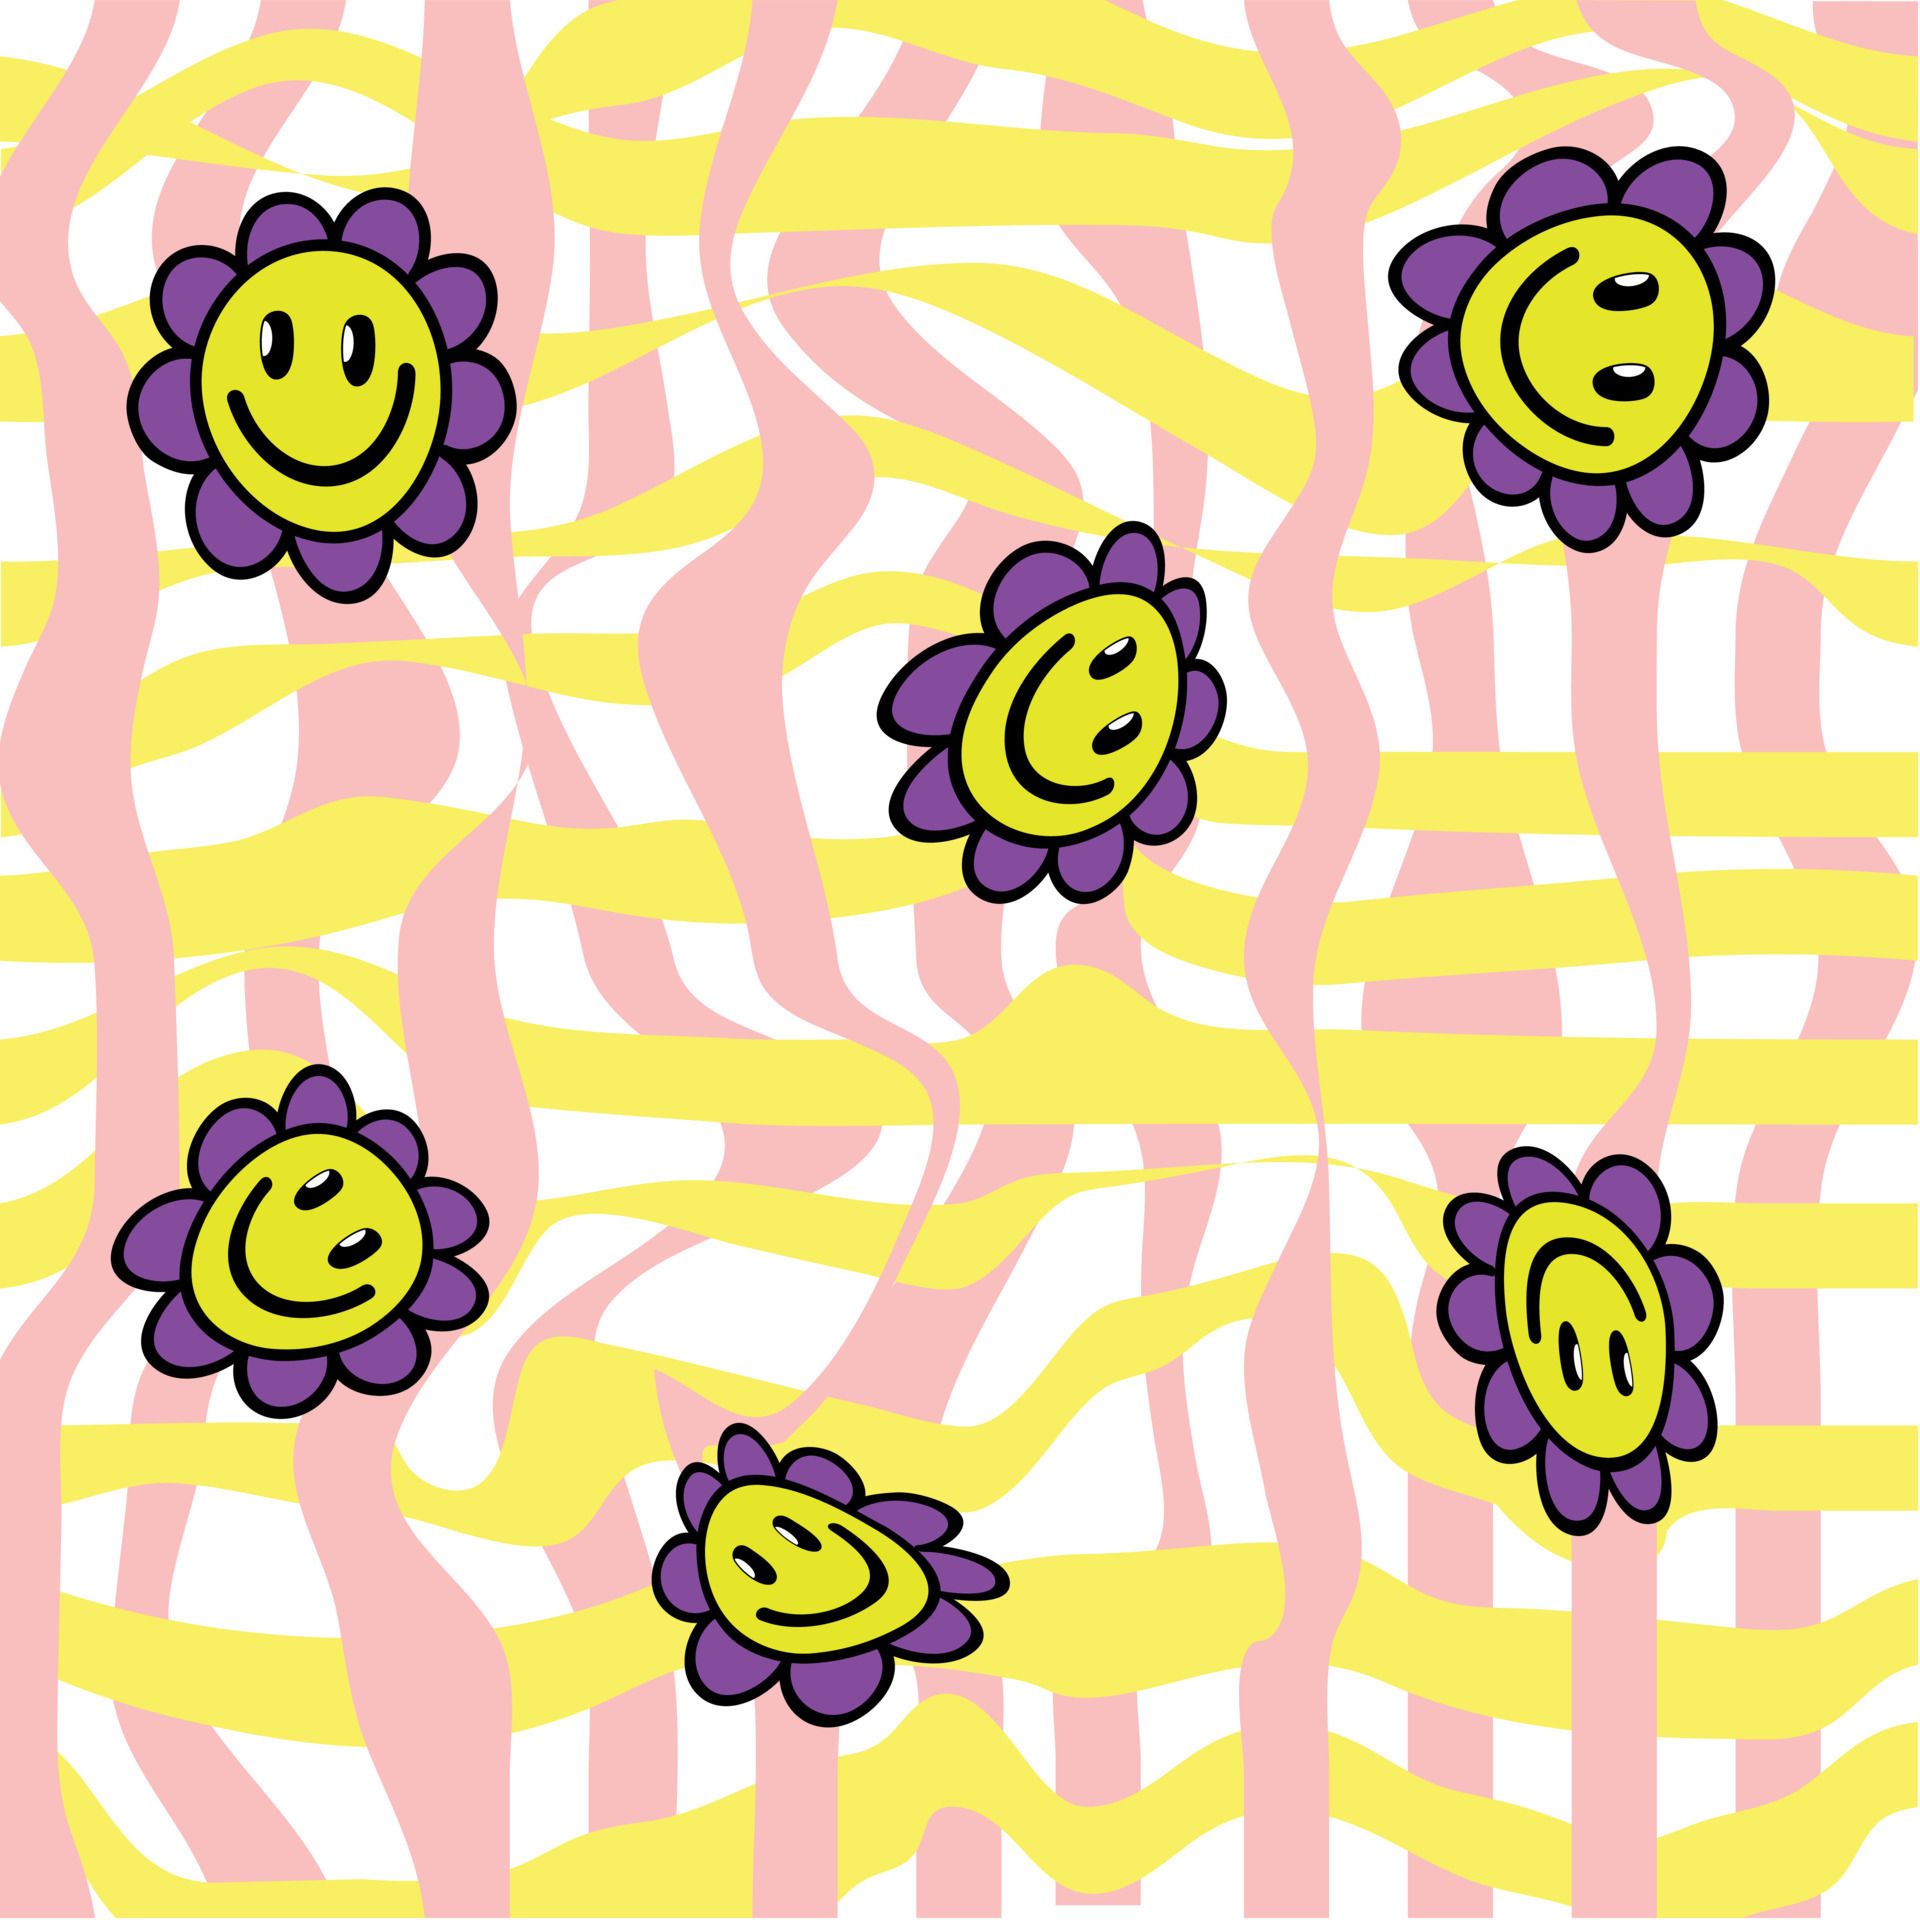 A pattern of flowers and smiley faces - Psychedelic, grid